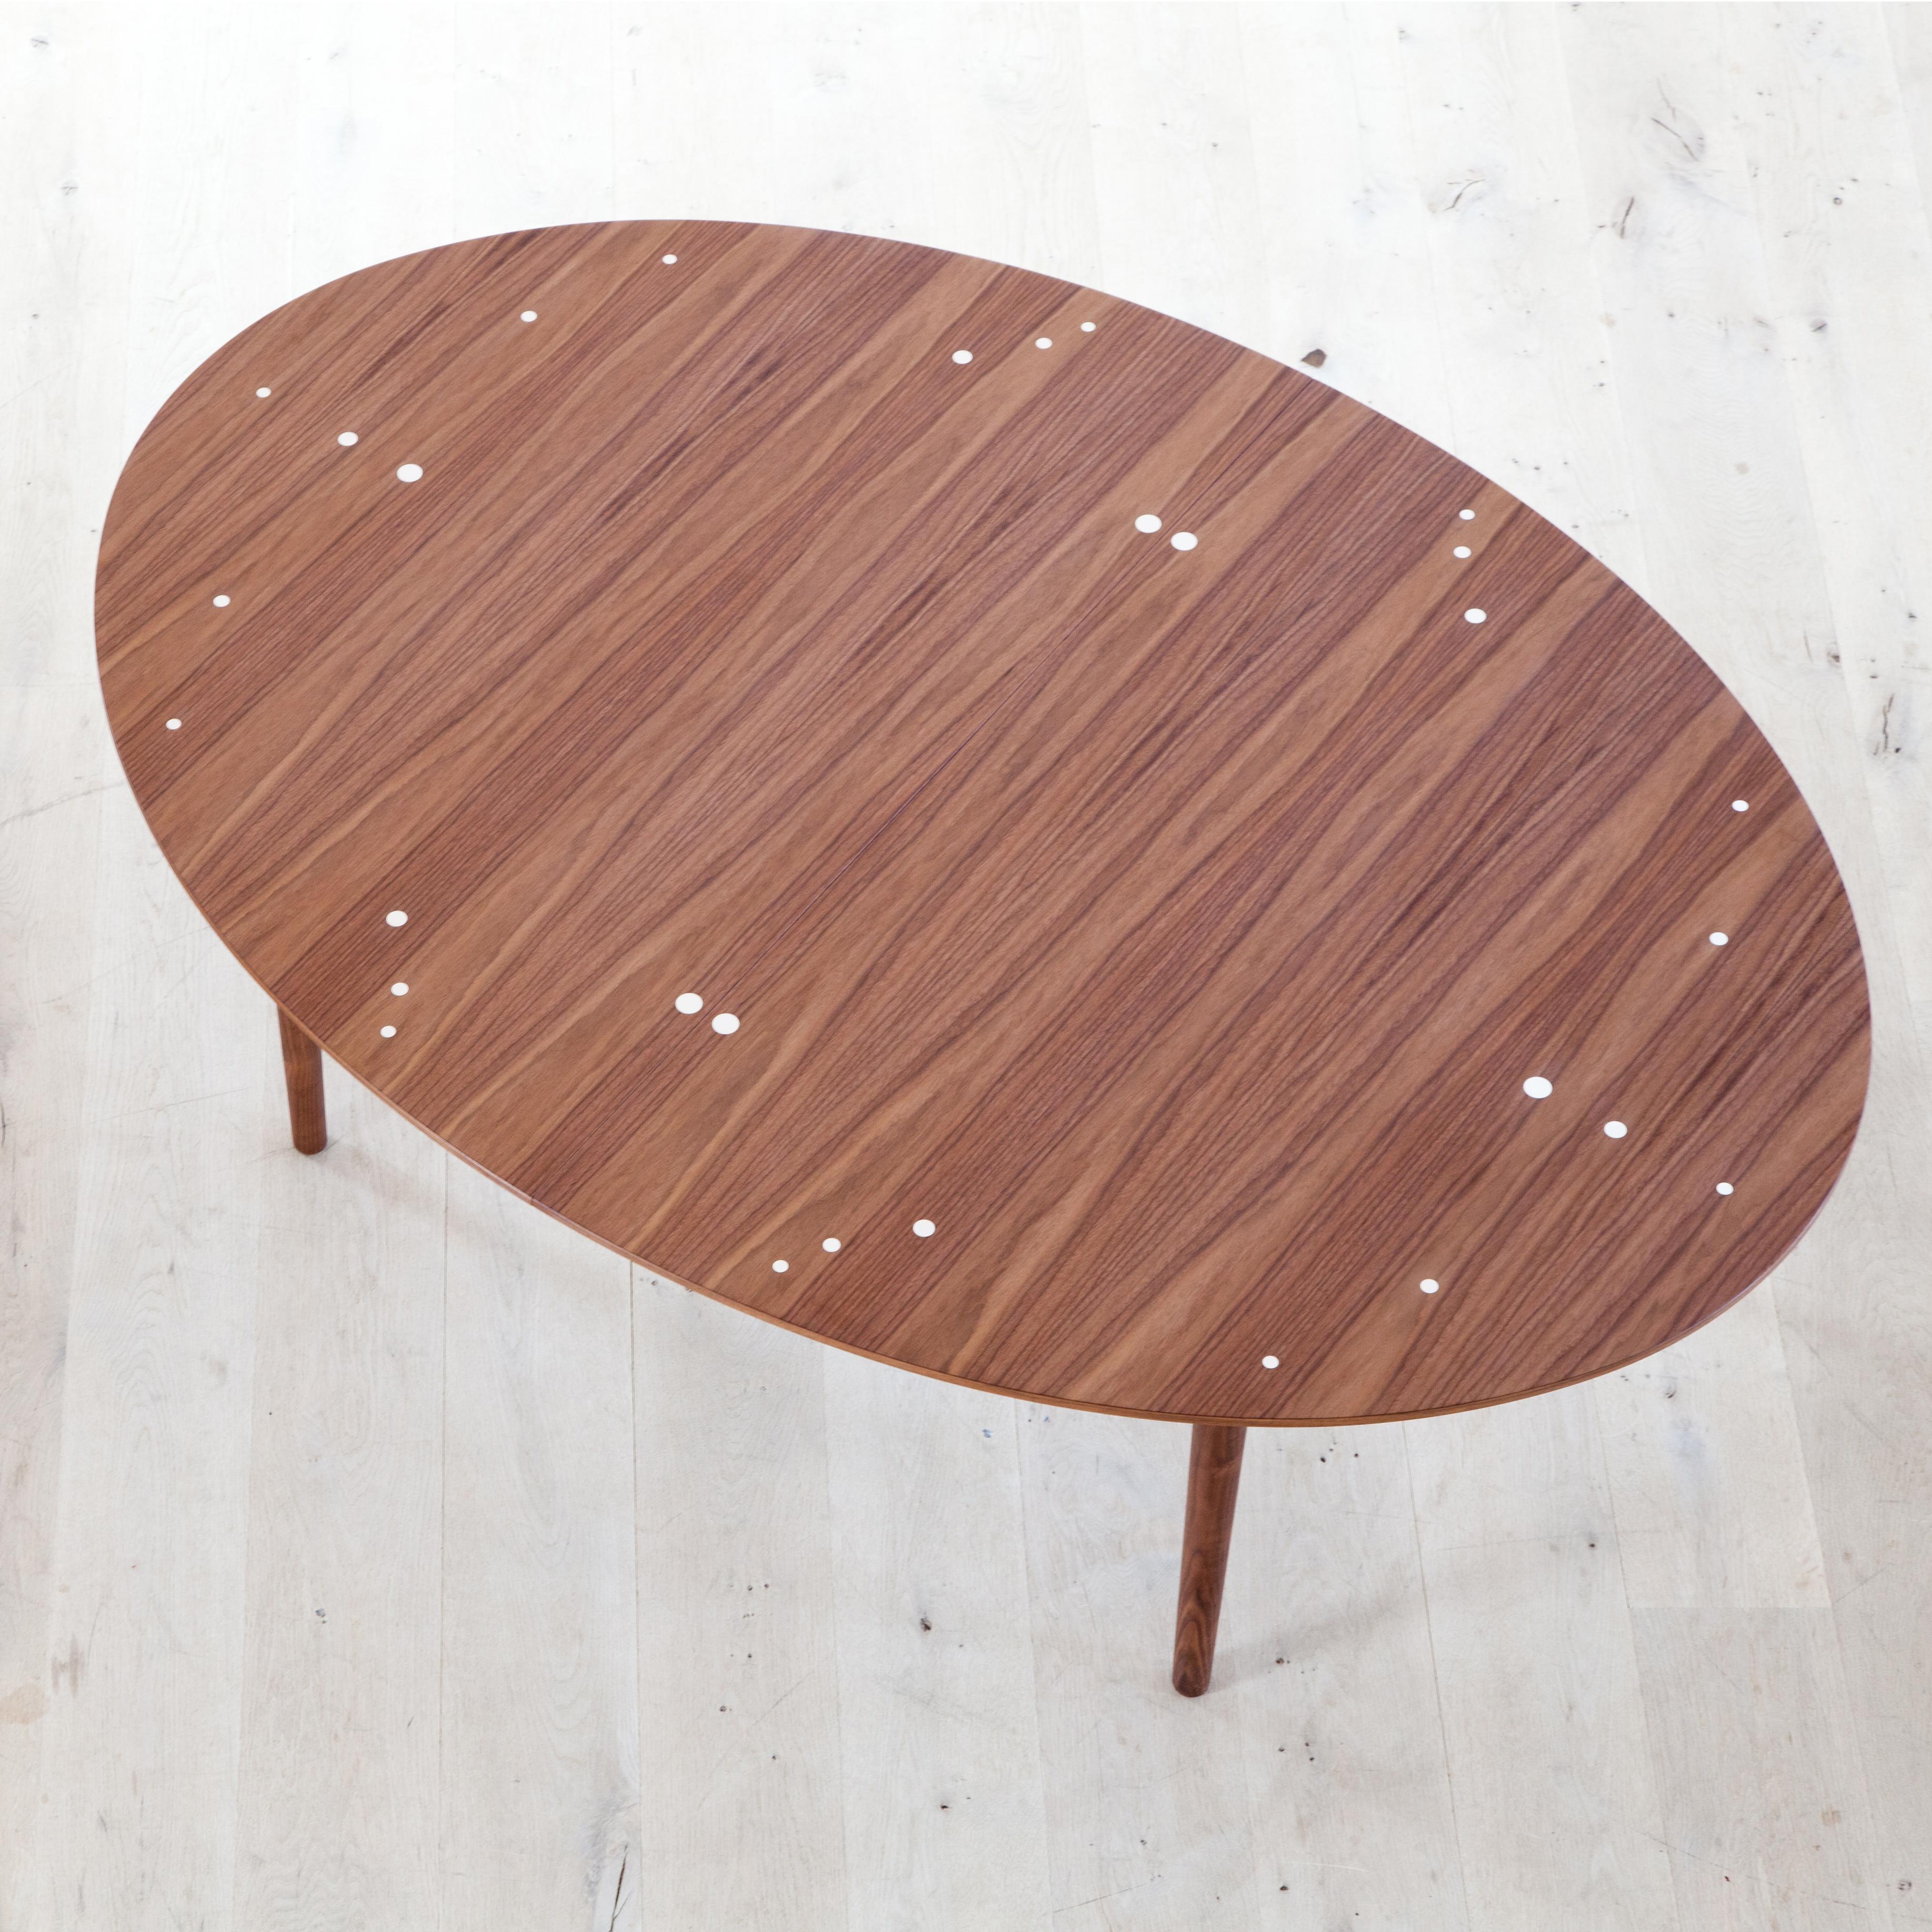 Table model Siolver table designed by Finn Juhl
Manufactured by One collection Finn Juhl (Denmark)

Tabletop in veneer with solid edges and sterling silver inlays. Incl. two extension leaves

The positioning of the silver inlays is far from